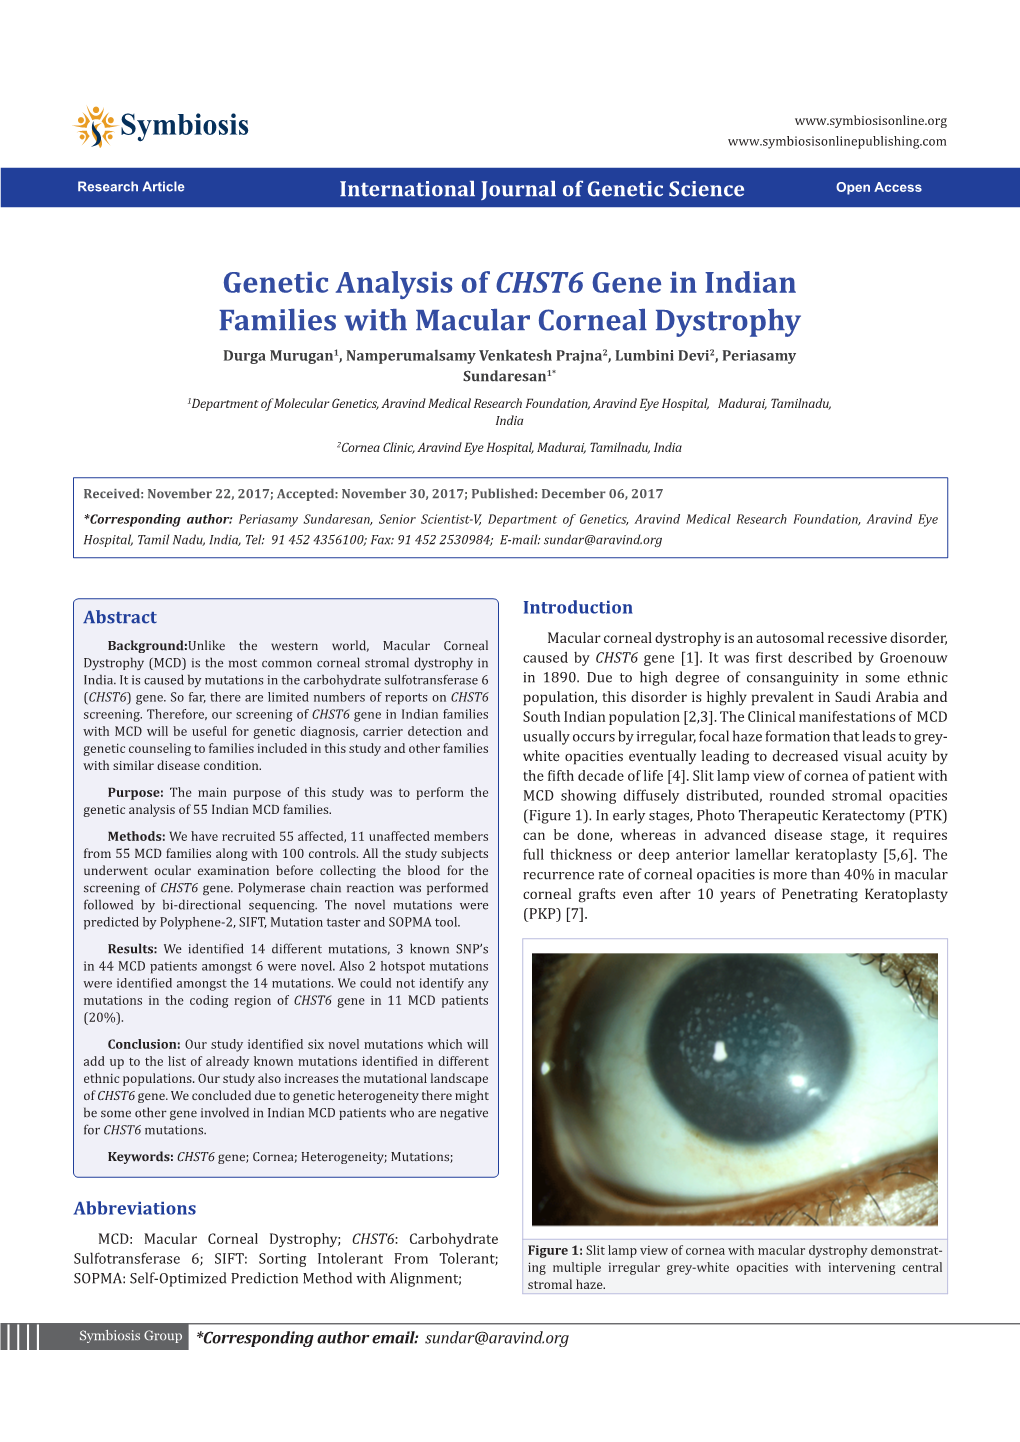 Genetic Analysis of CHST6 Gene in Indian Families with Macular